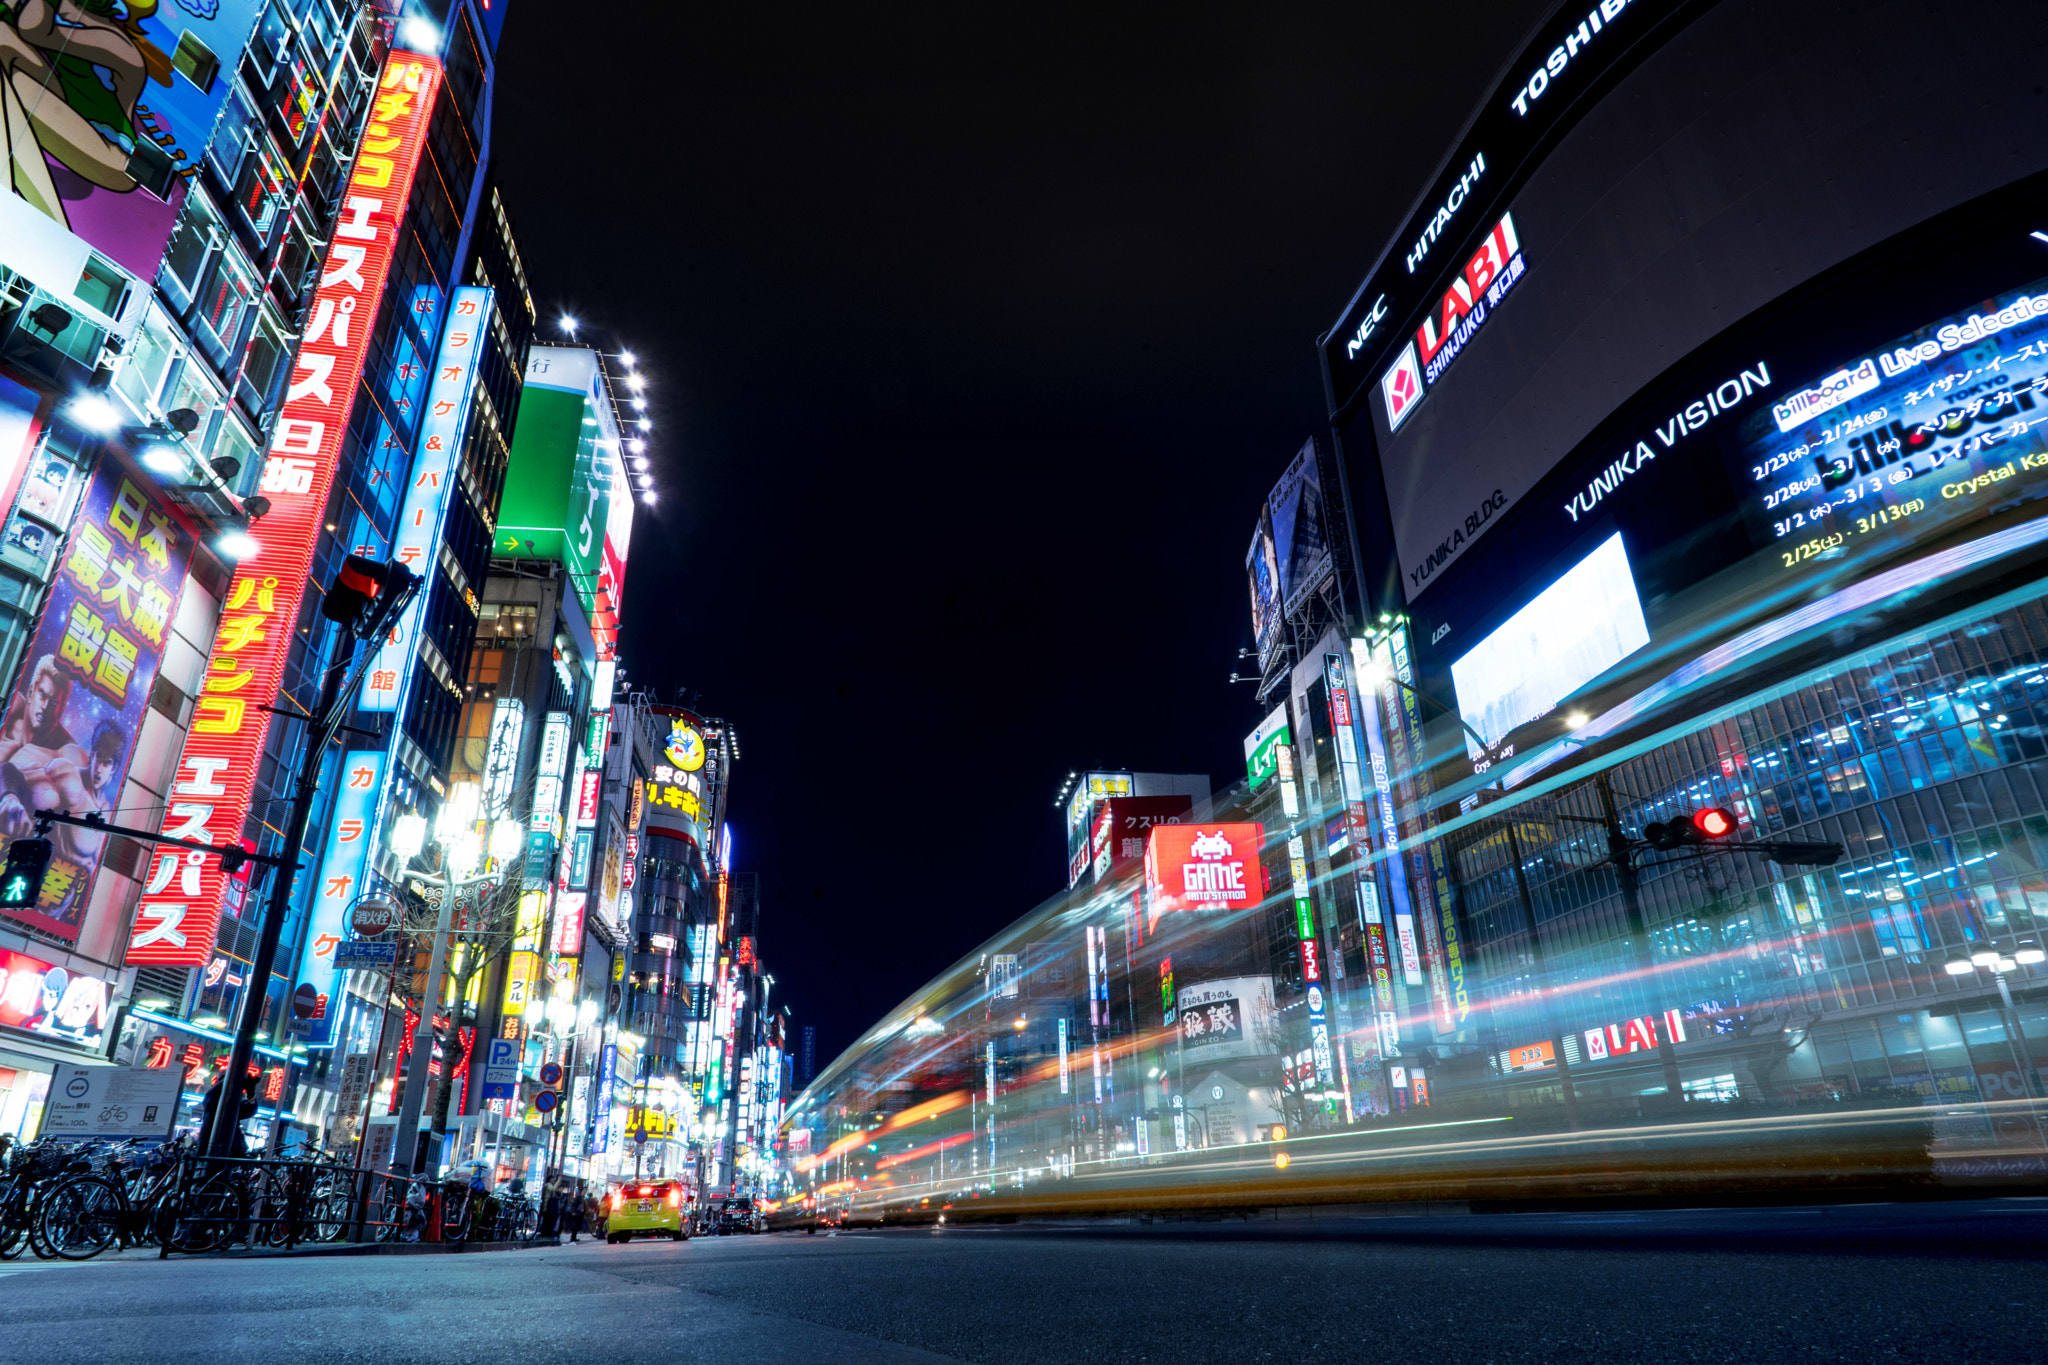 Sony a7 II + FE 21mm F2.8 sample photo. Fast and the curious: tokyo myth photography